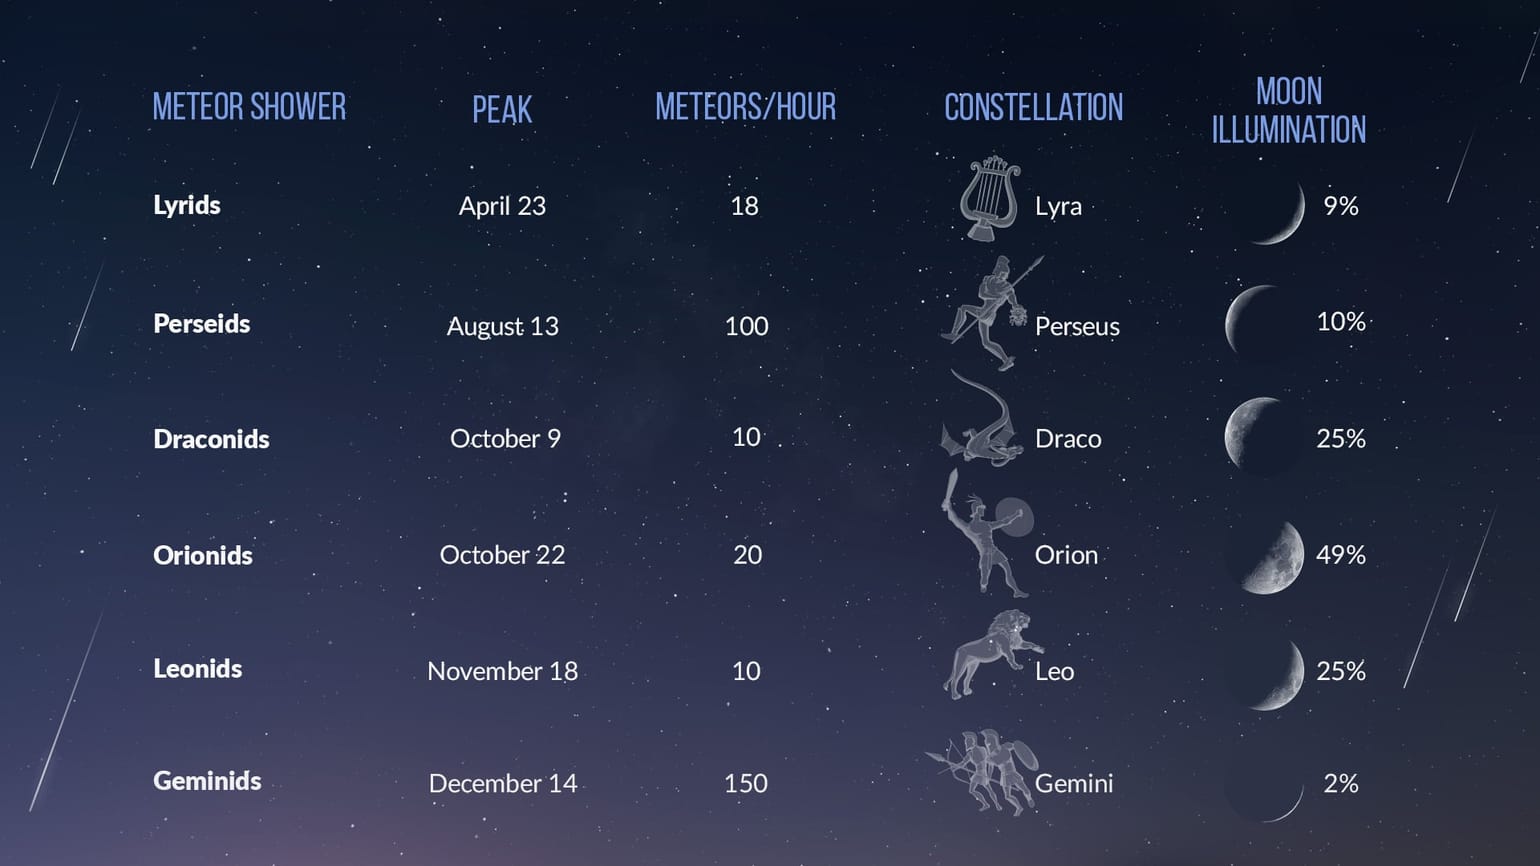 astronomical events happening in october 2023